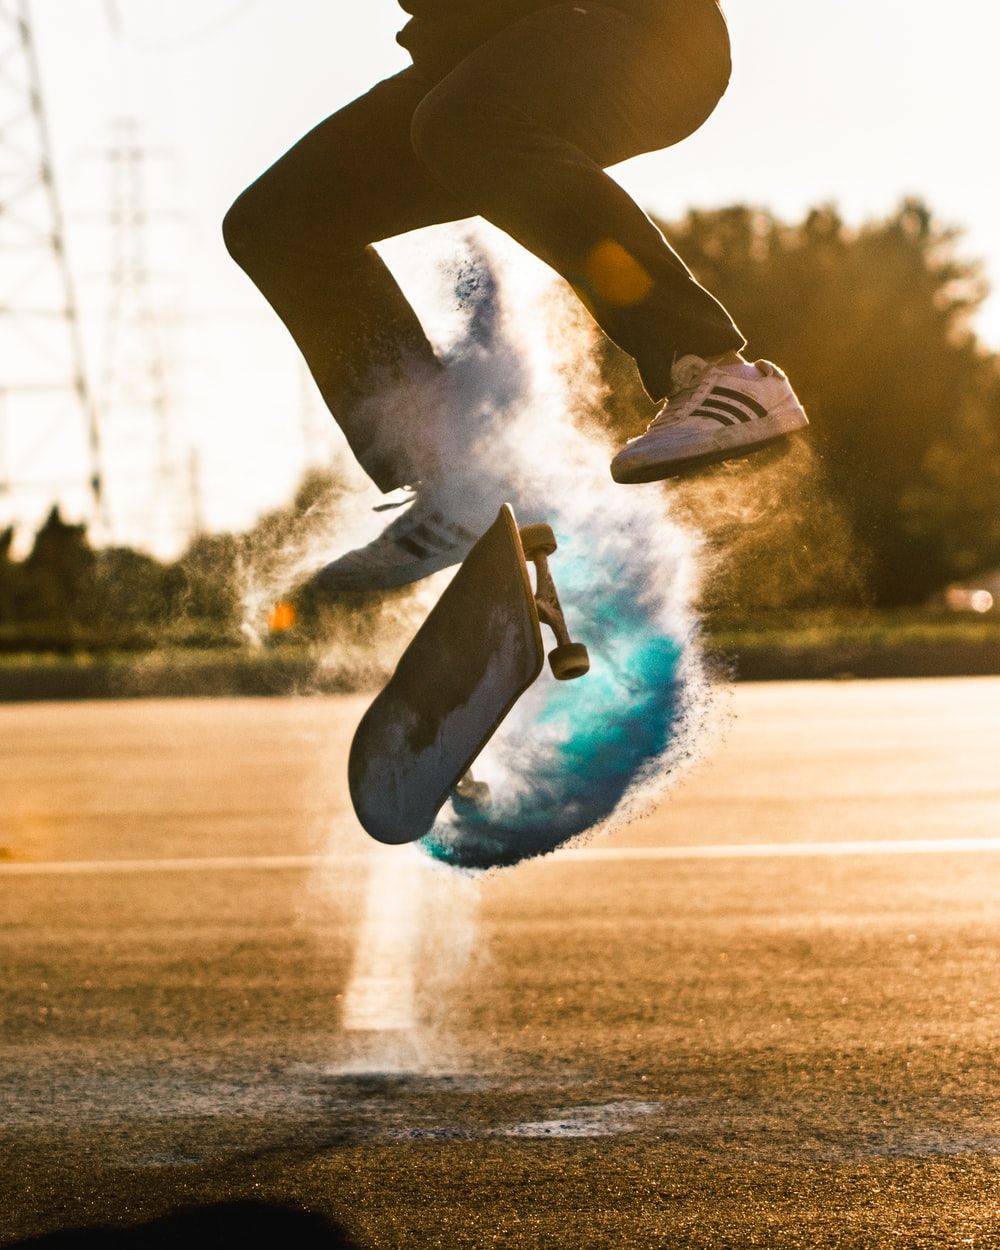 Skate Picture. Download Free Image